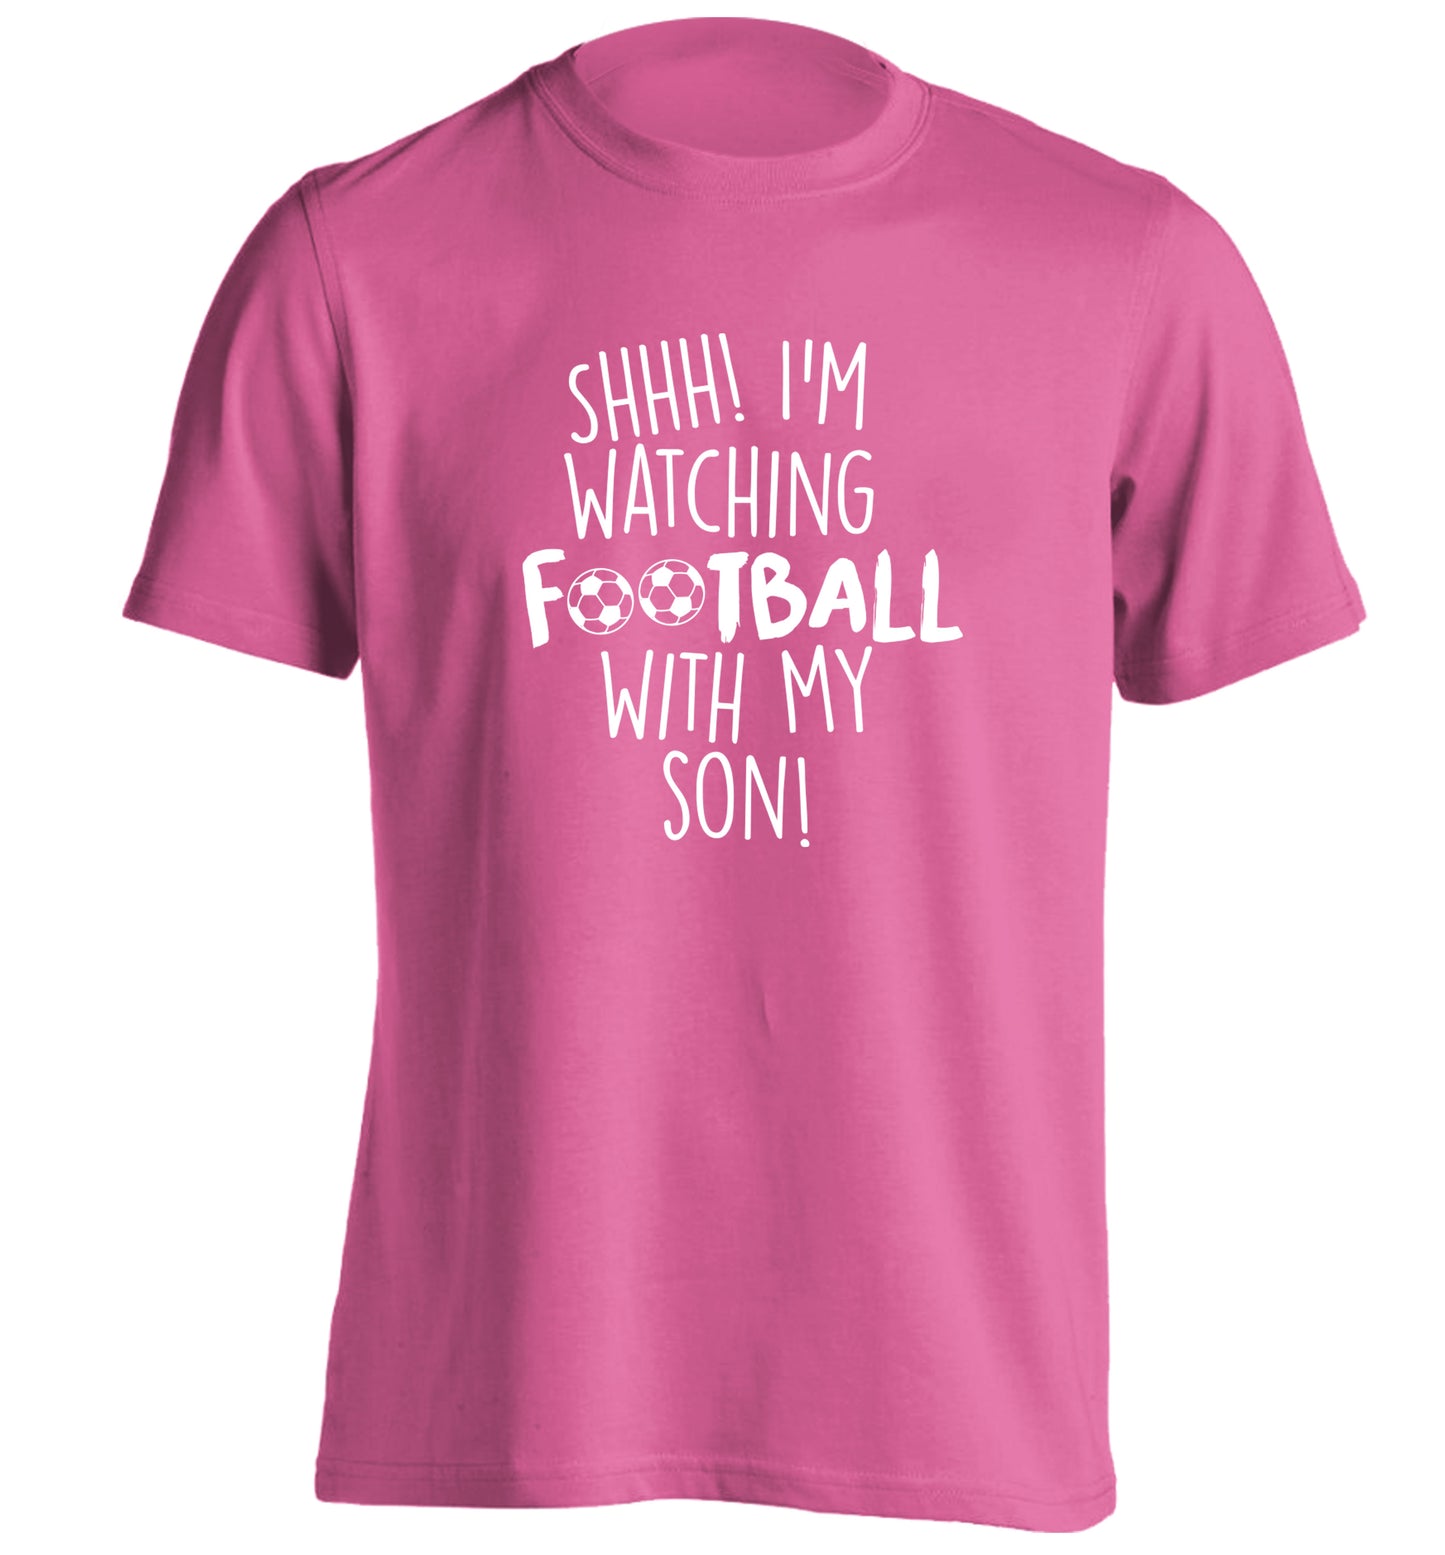 Shhh I'm watching football with my son adults unisexpink Tshirt 2XL